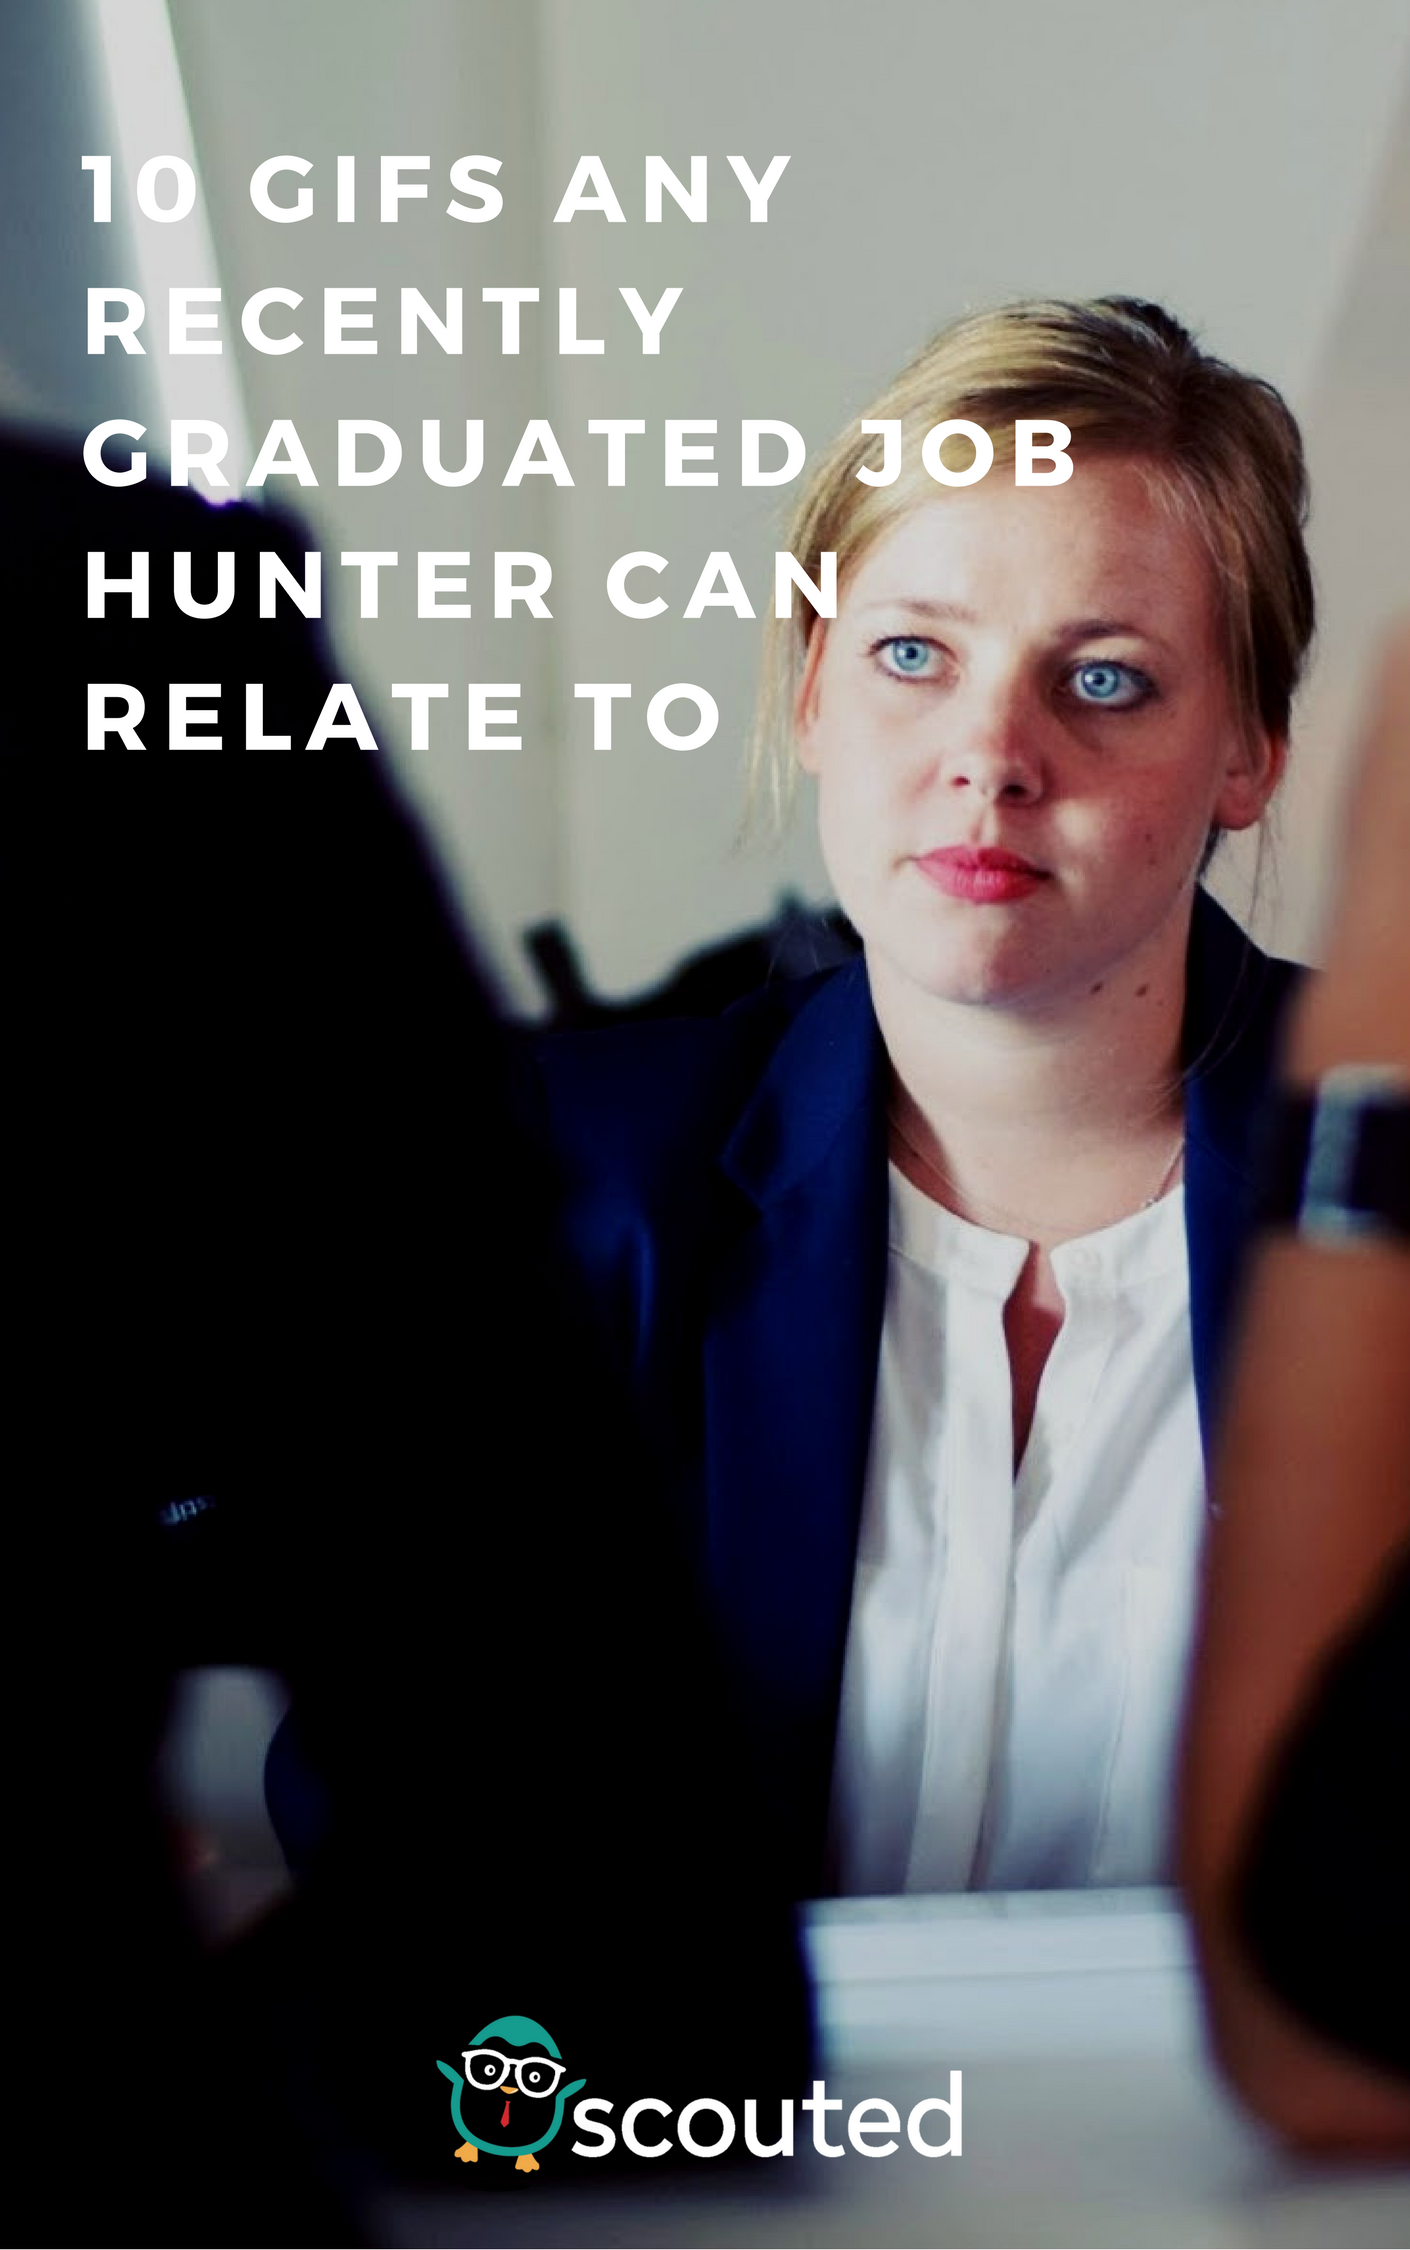 Being a recently graduated job hunter can be a stressful time in one’s life. In times of stress, we like to use gifs as a coping mechanism, Here are 10 situations, as told by gifs, that any job hunter can relate to!